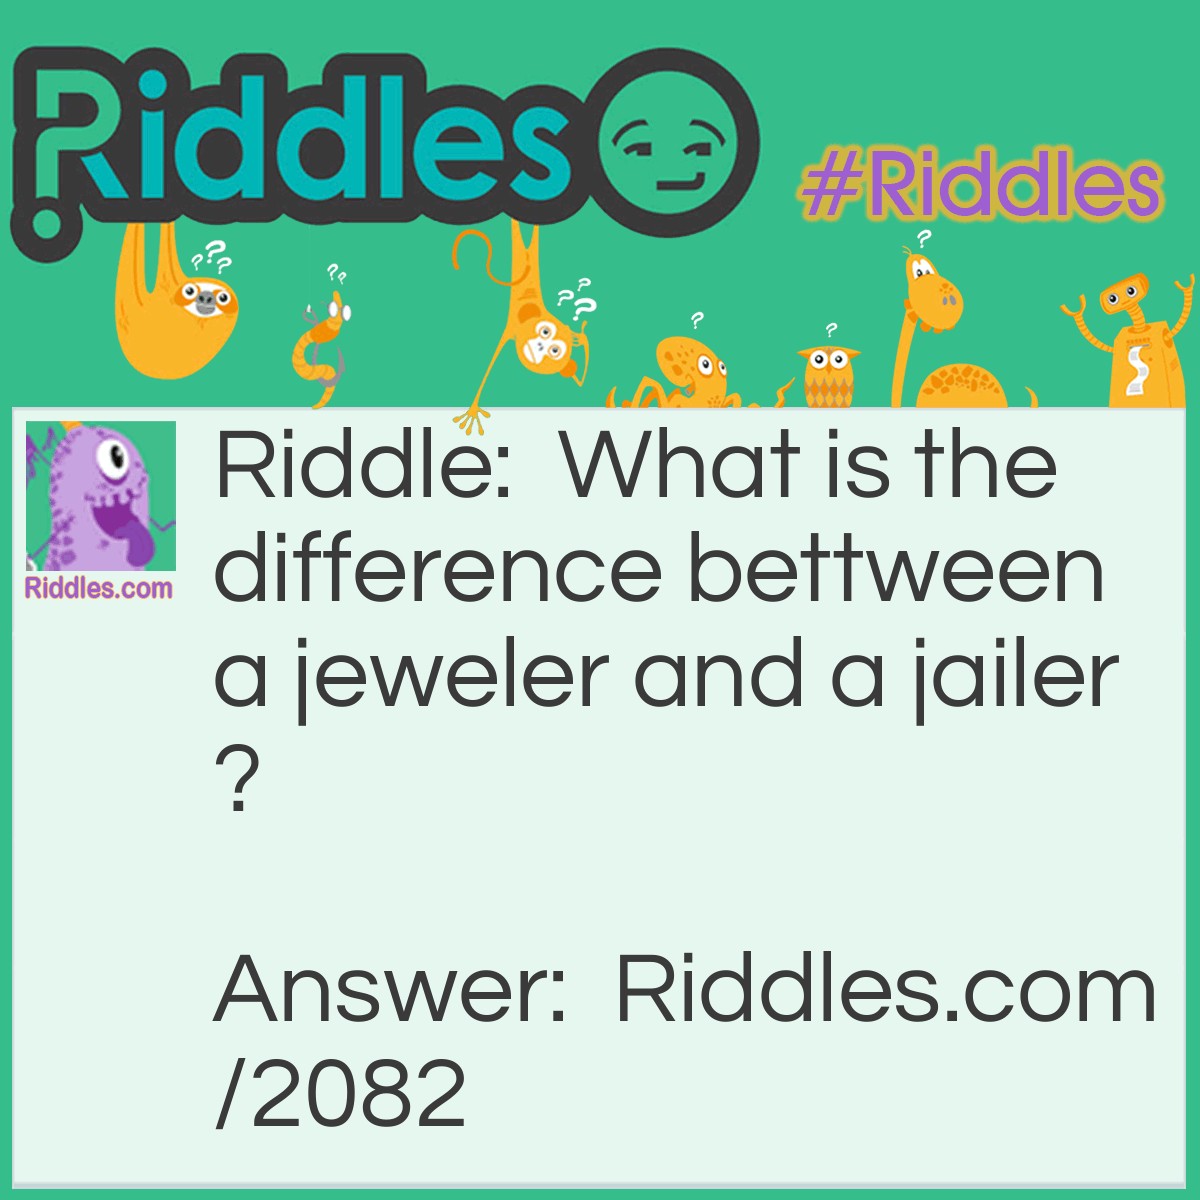 Riddle: What is the difference between a jeweler and a jailer? Answer: A jeweler sells watches, a jailer watches cells.